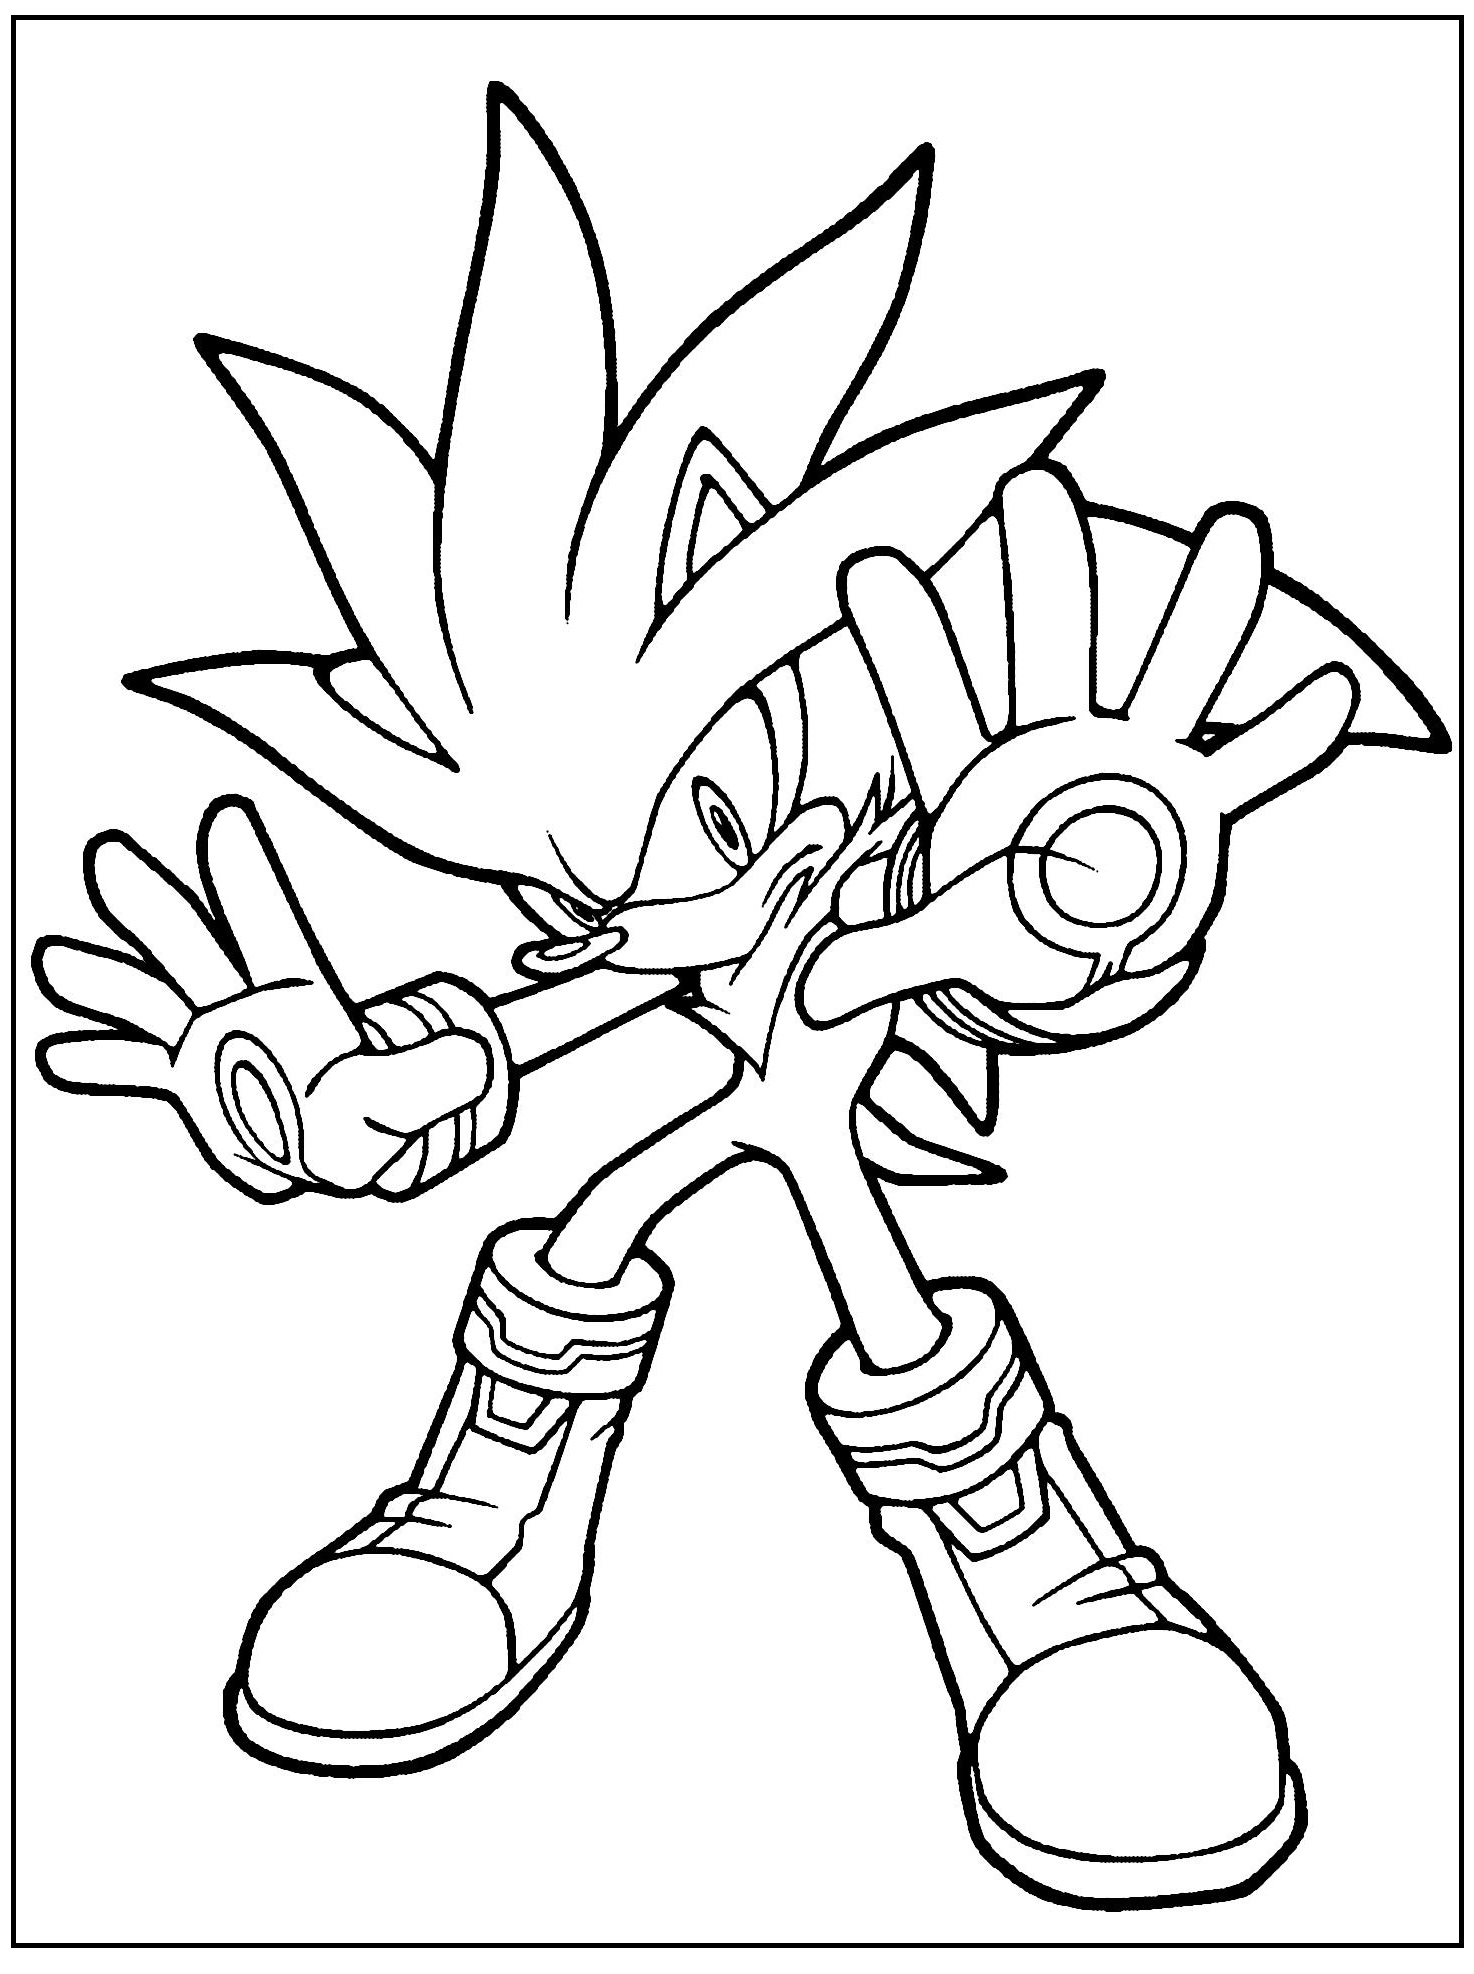 Silver The Hedgehog Coloring Page Coloring Home